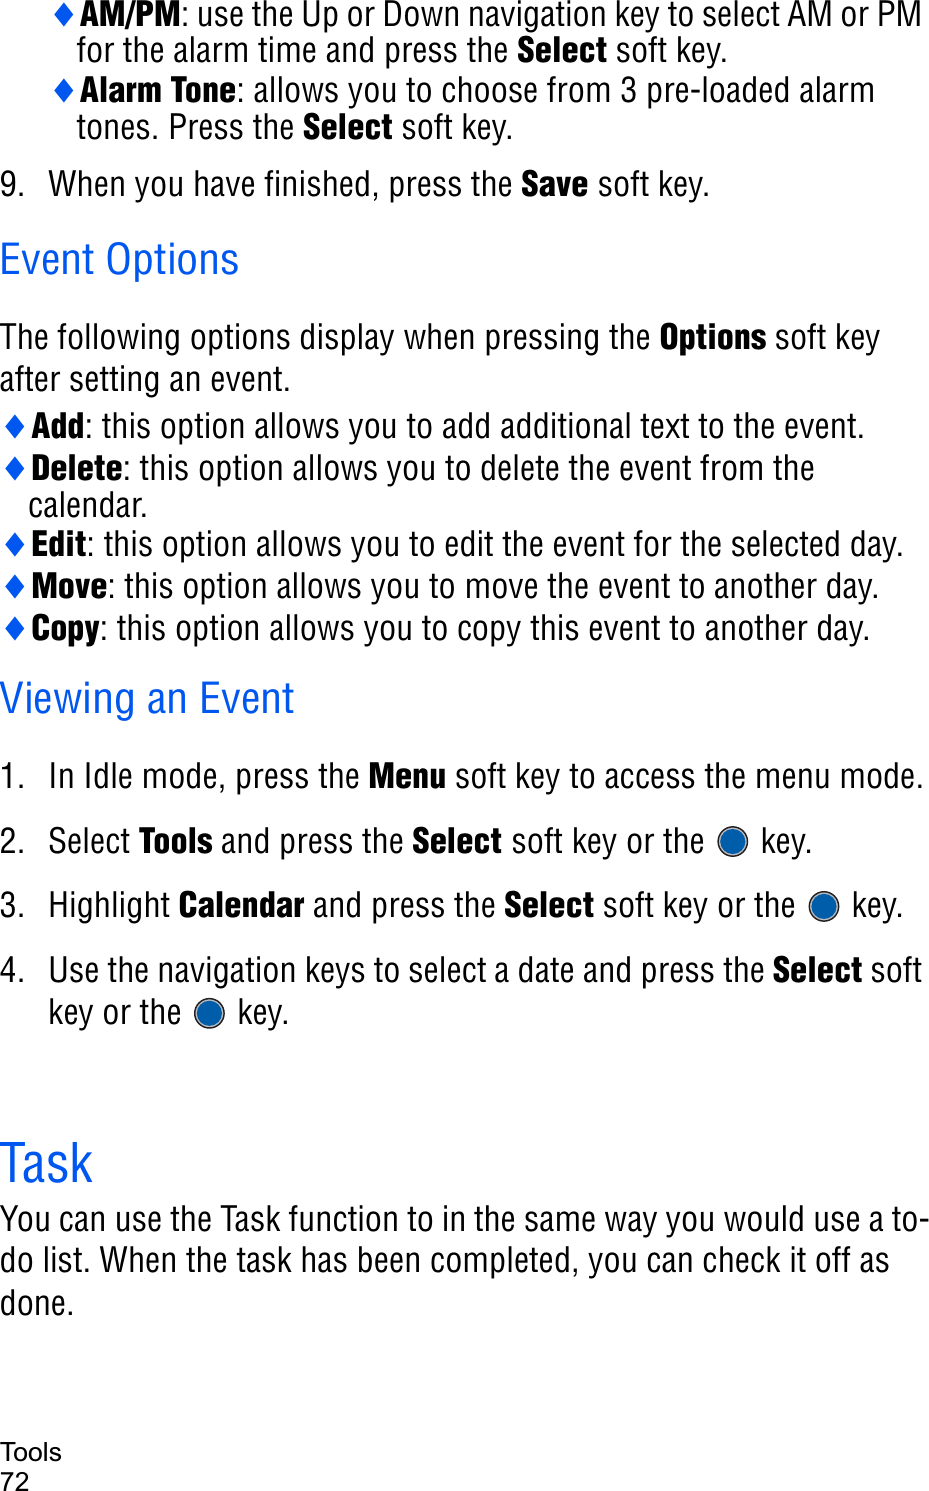 Tools72iAM/PM: use the Up or Down navigation key to select AM or PM for the alarm time and press the Select soft key.iAlarm Tone: allows you to choose from 3 pre-loaded alarm tones. Press the Select soft key.9. When you have finished, press the Save soft key. Event OptionsThe following options display when pressing the Options soft key after setting an event.iAdd: this option allows you to add additional text to the event.iDelete: this option allows you to delete the event from the calendar.iEdit: this option allows you to edit the event for the selected day.iMove: this option allows you to move the event to another day.iCopy: this option allows you to copy this event to another day.Viewing an Event 1. In Idle mode, press the Menu soft key to access the menu mode.2. Select Tools and press the Select soft key or the   key. 3. Highlight Calendar and press the Select soft key or the   key.4. Use the navigation keys to select a date and press the Select soft key or the   key.TaskYou can use the Task function to in the same way you would use a to-do list. When the task has been completed, you can check it off as done. 